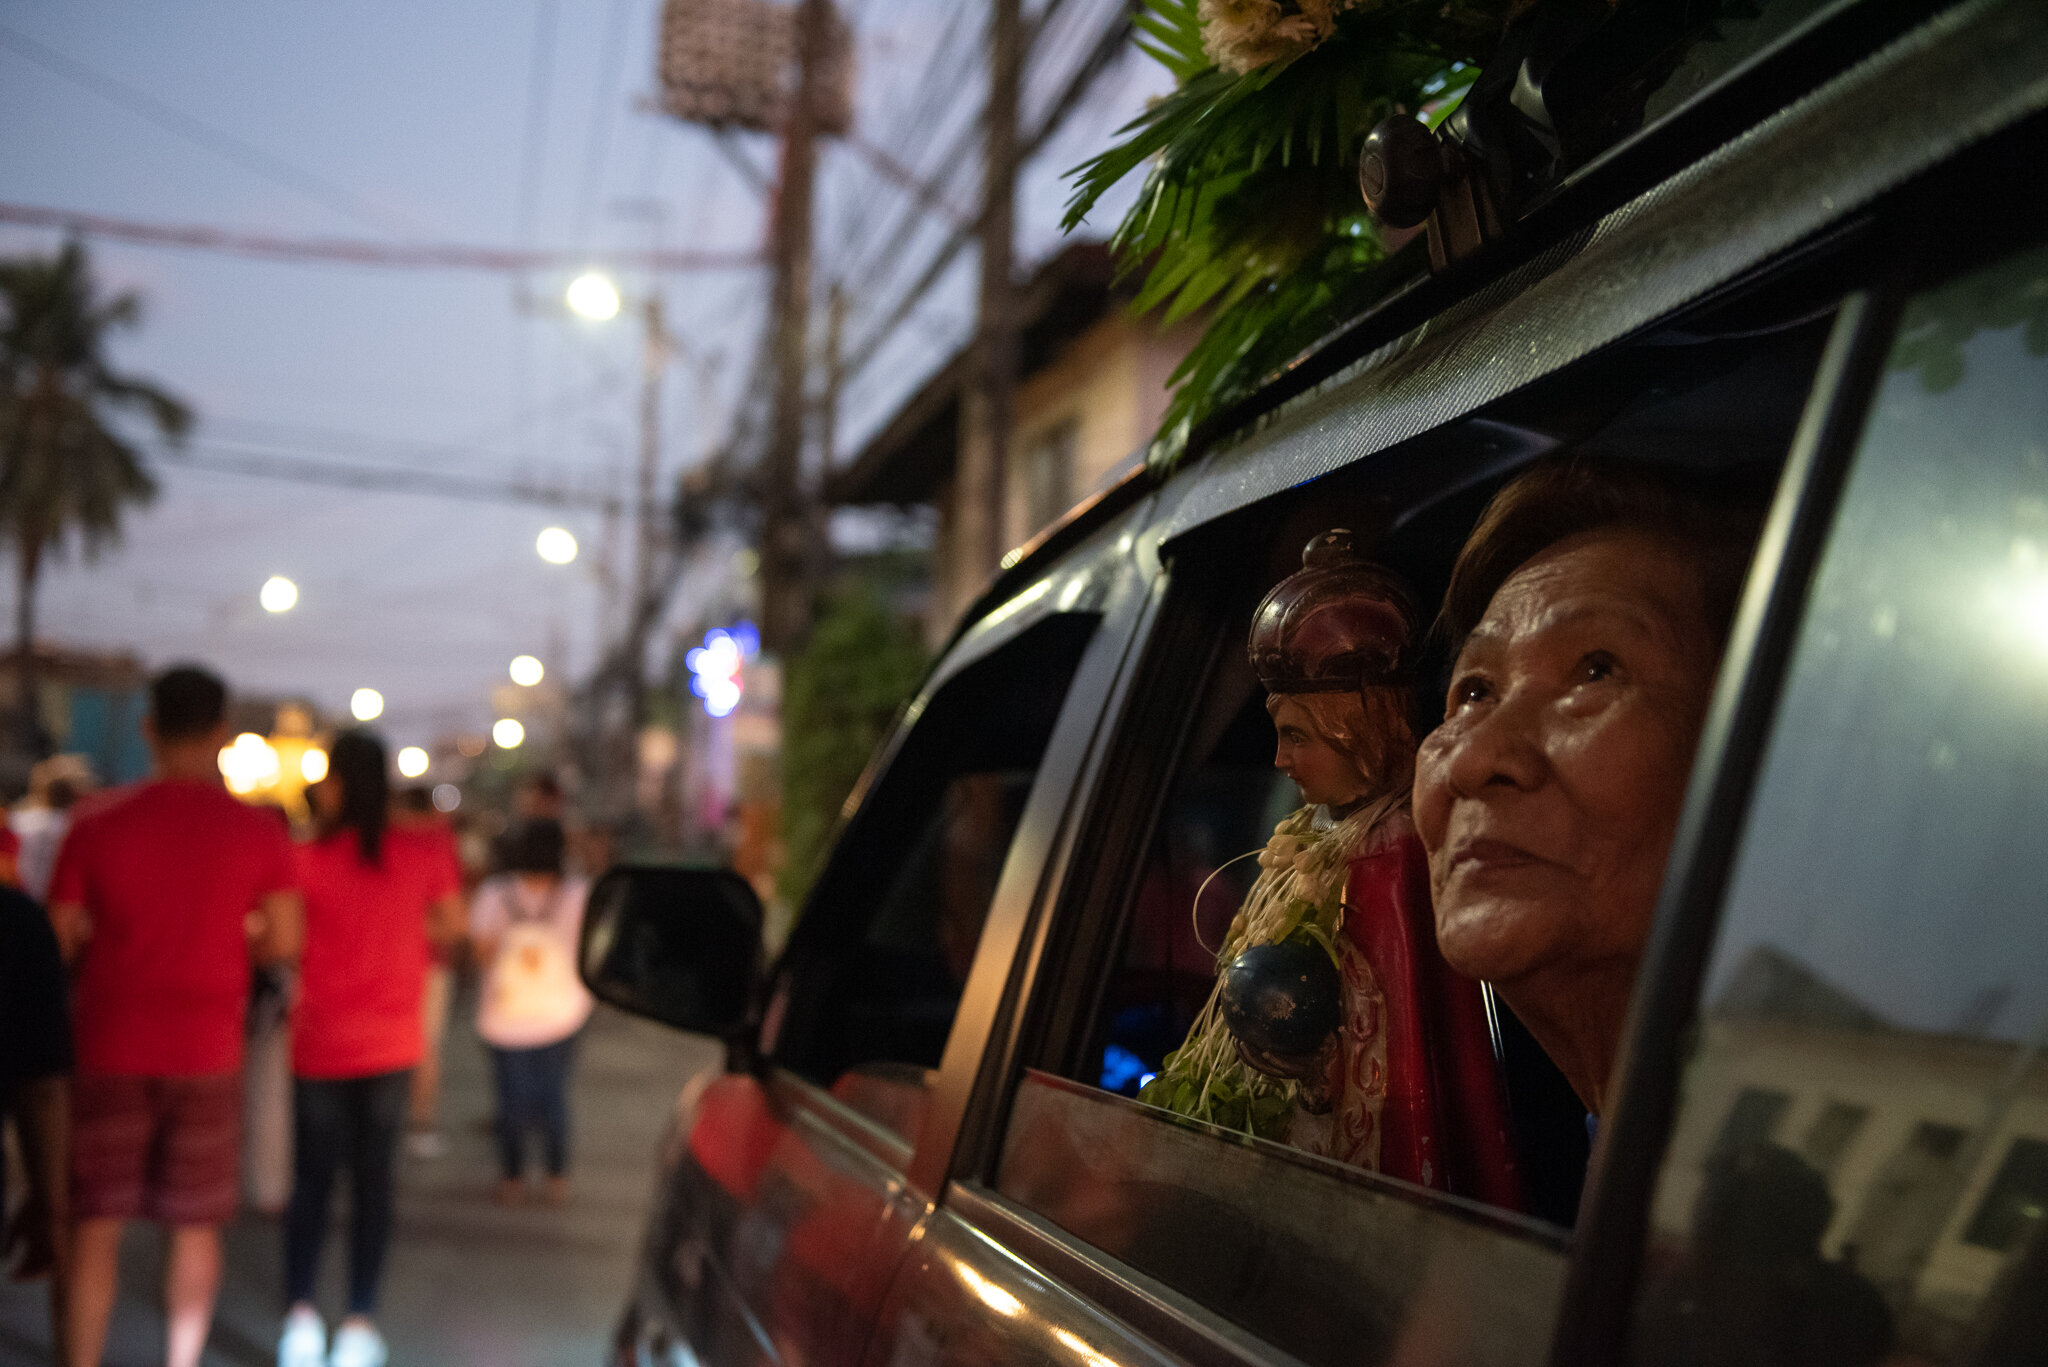  An old woman watches the procession from inside the car. 